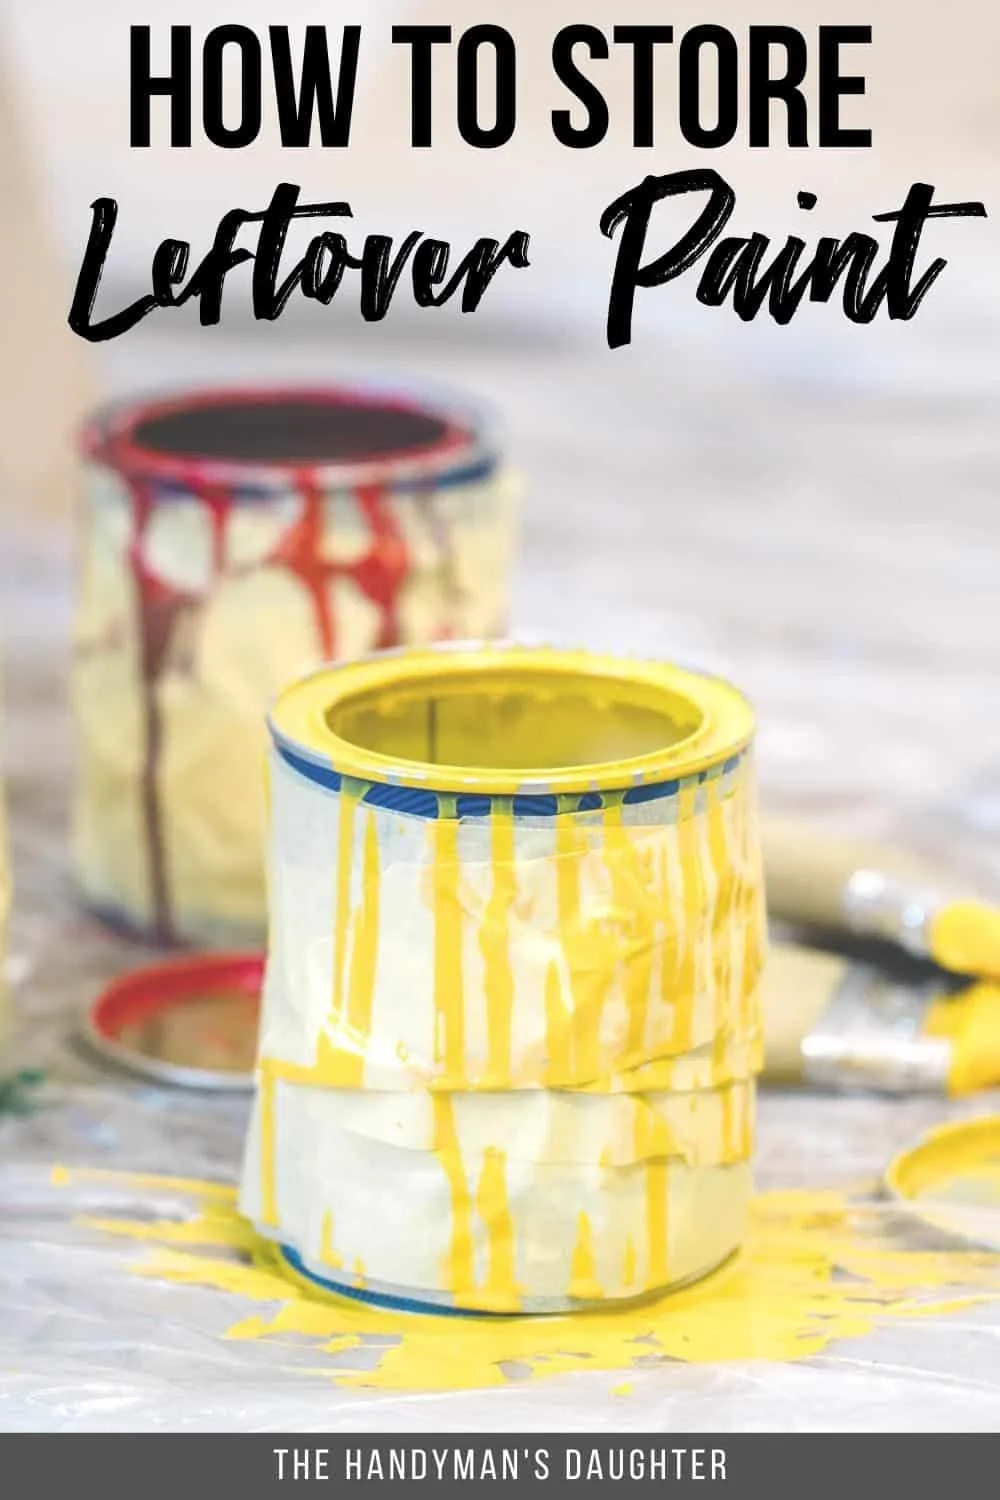 How to Store Leftover Paint - The Handyman's Daughter